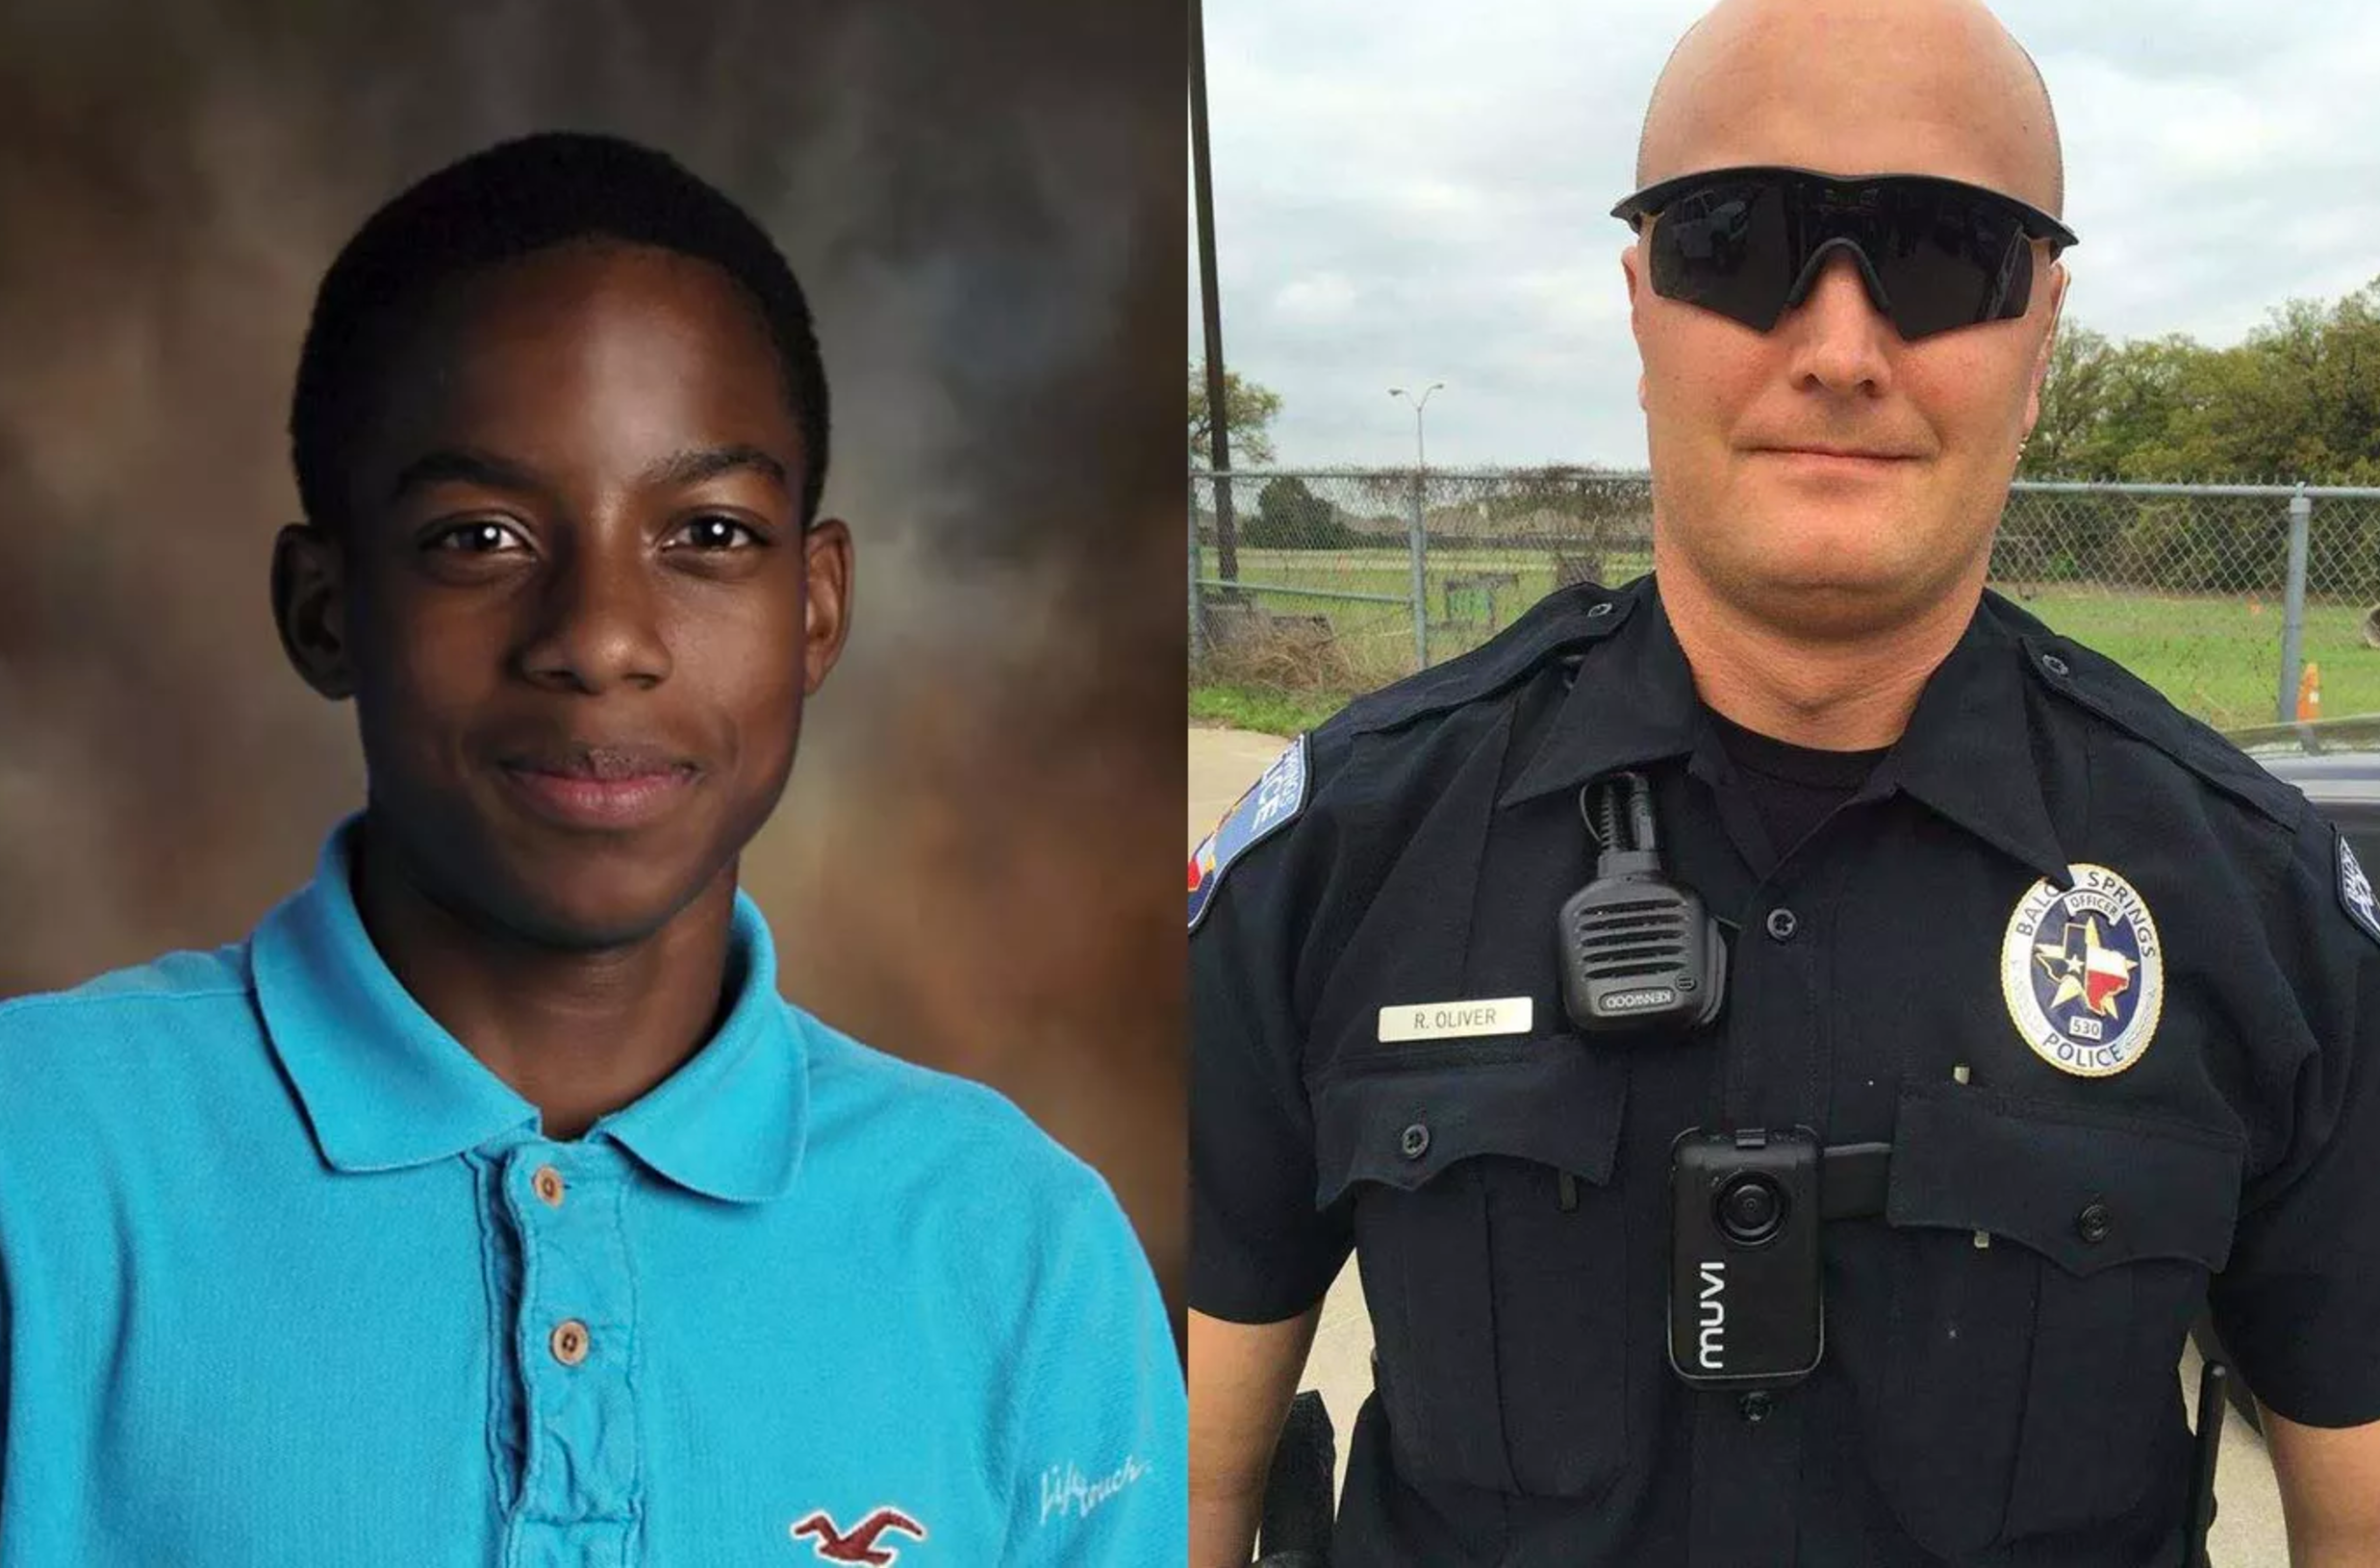 Texas Cop Who Killed Black Teen Jordan Edwards Indicted On Murder Charge
